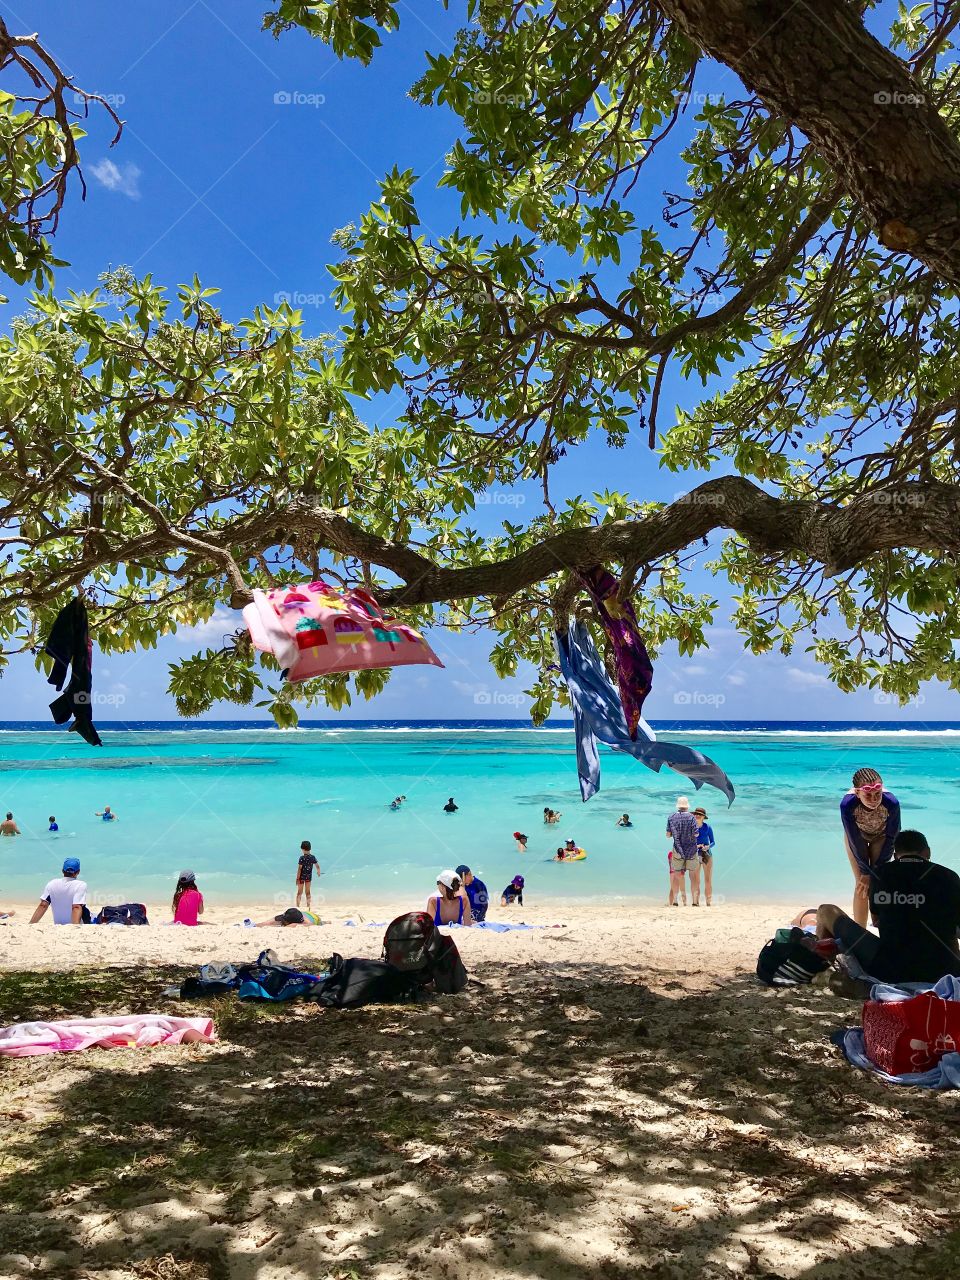 A nice shady tree on a tropical beach full of people, New Caledonia 